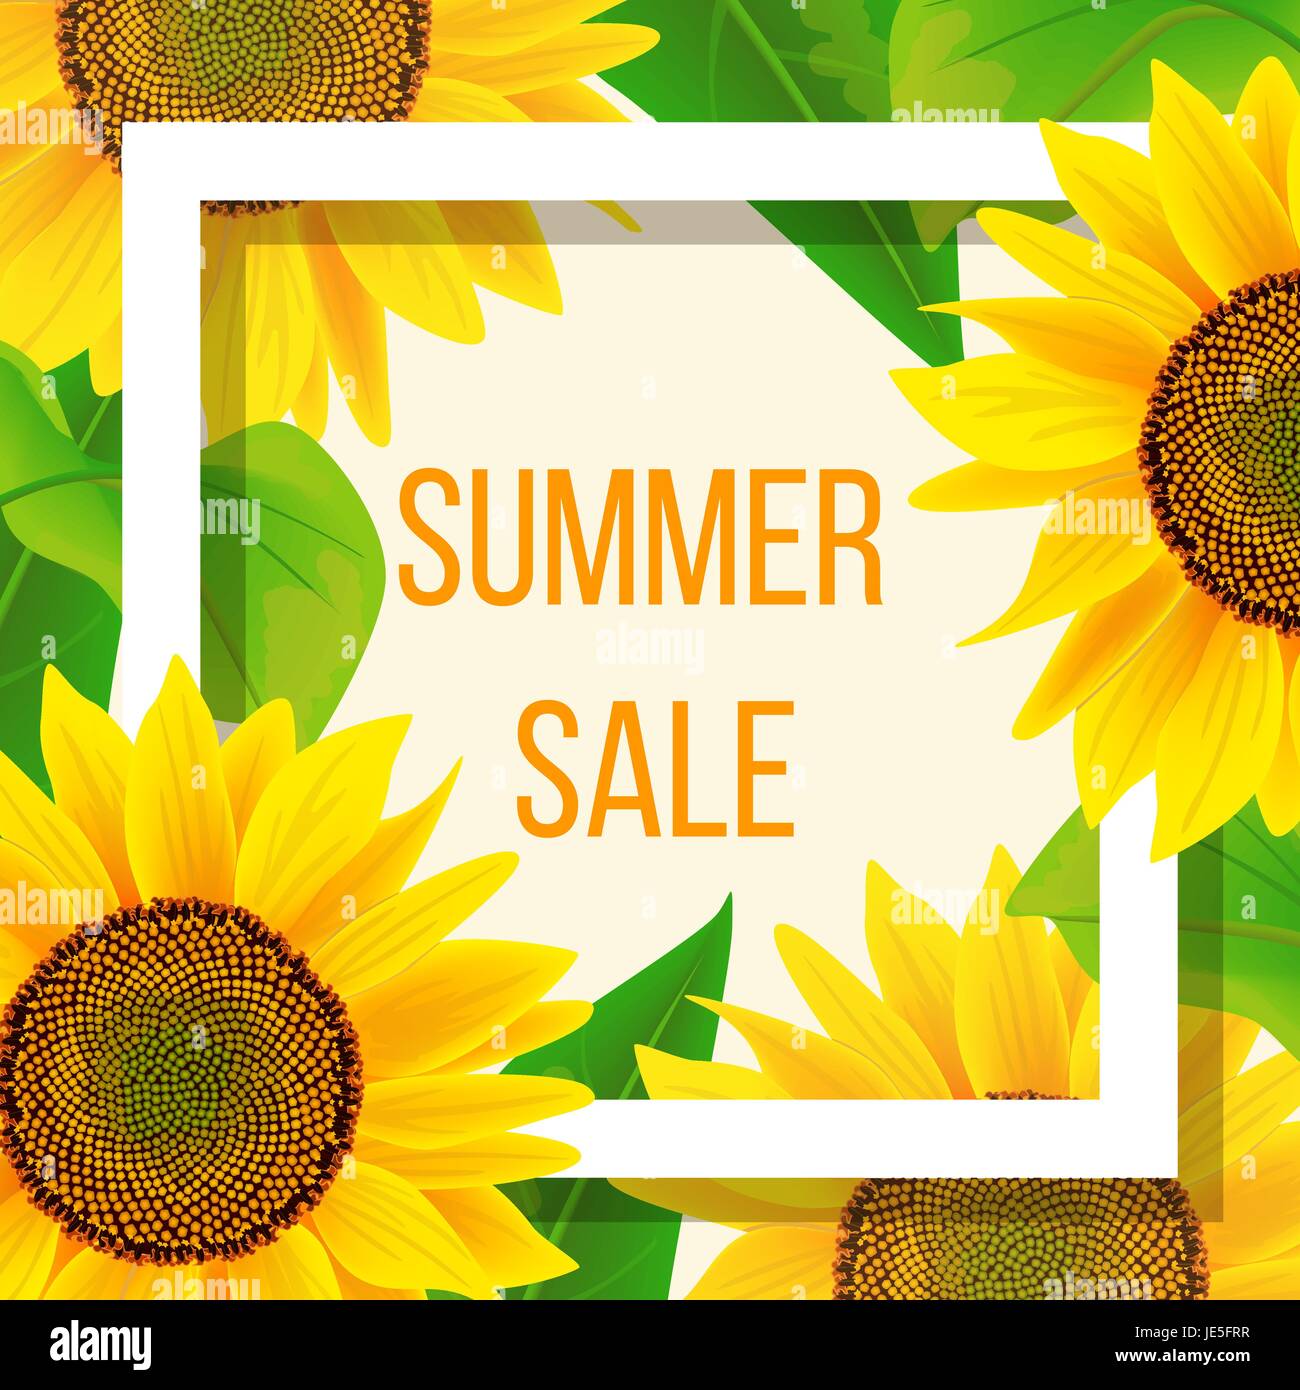 Summer sale banner template with sunflowers, vector illustration. advertising text in square. Floral vivid frame. Poster template Stock Vector